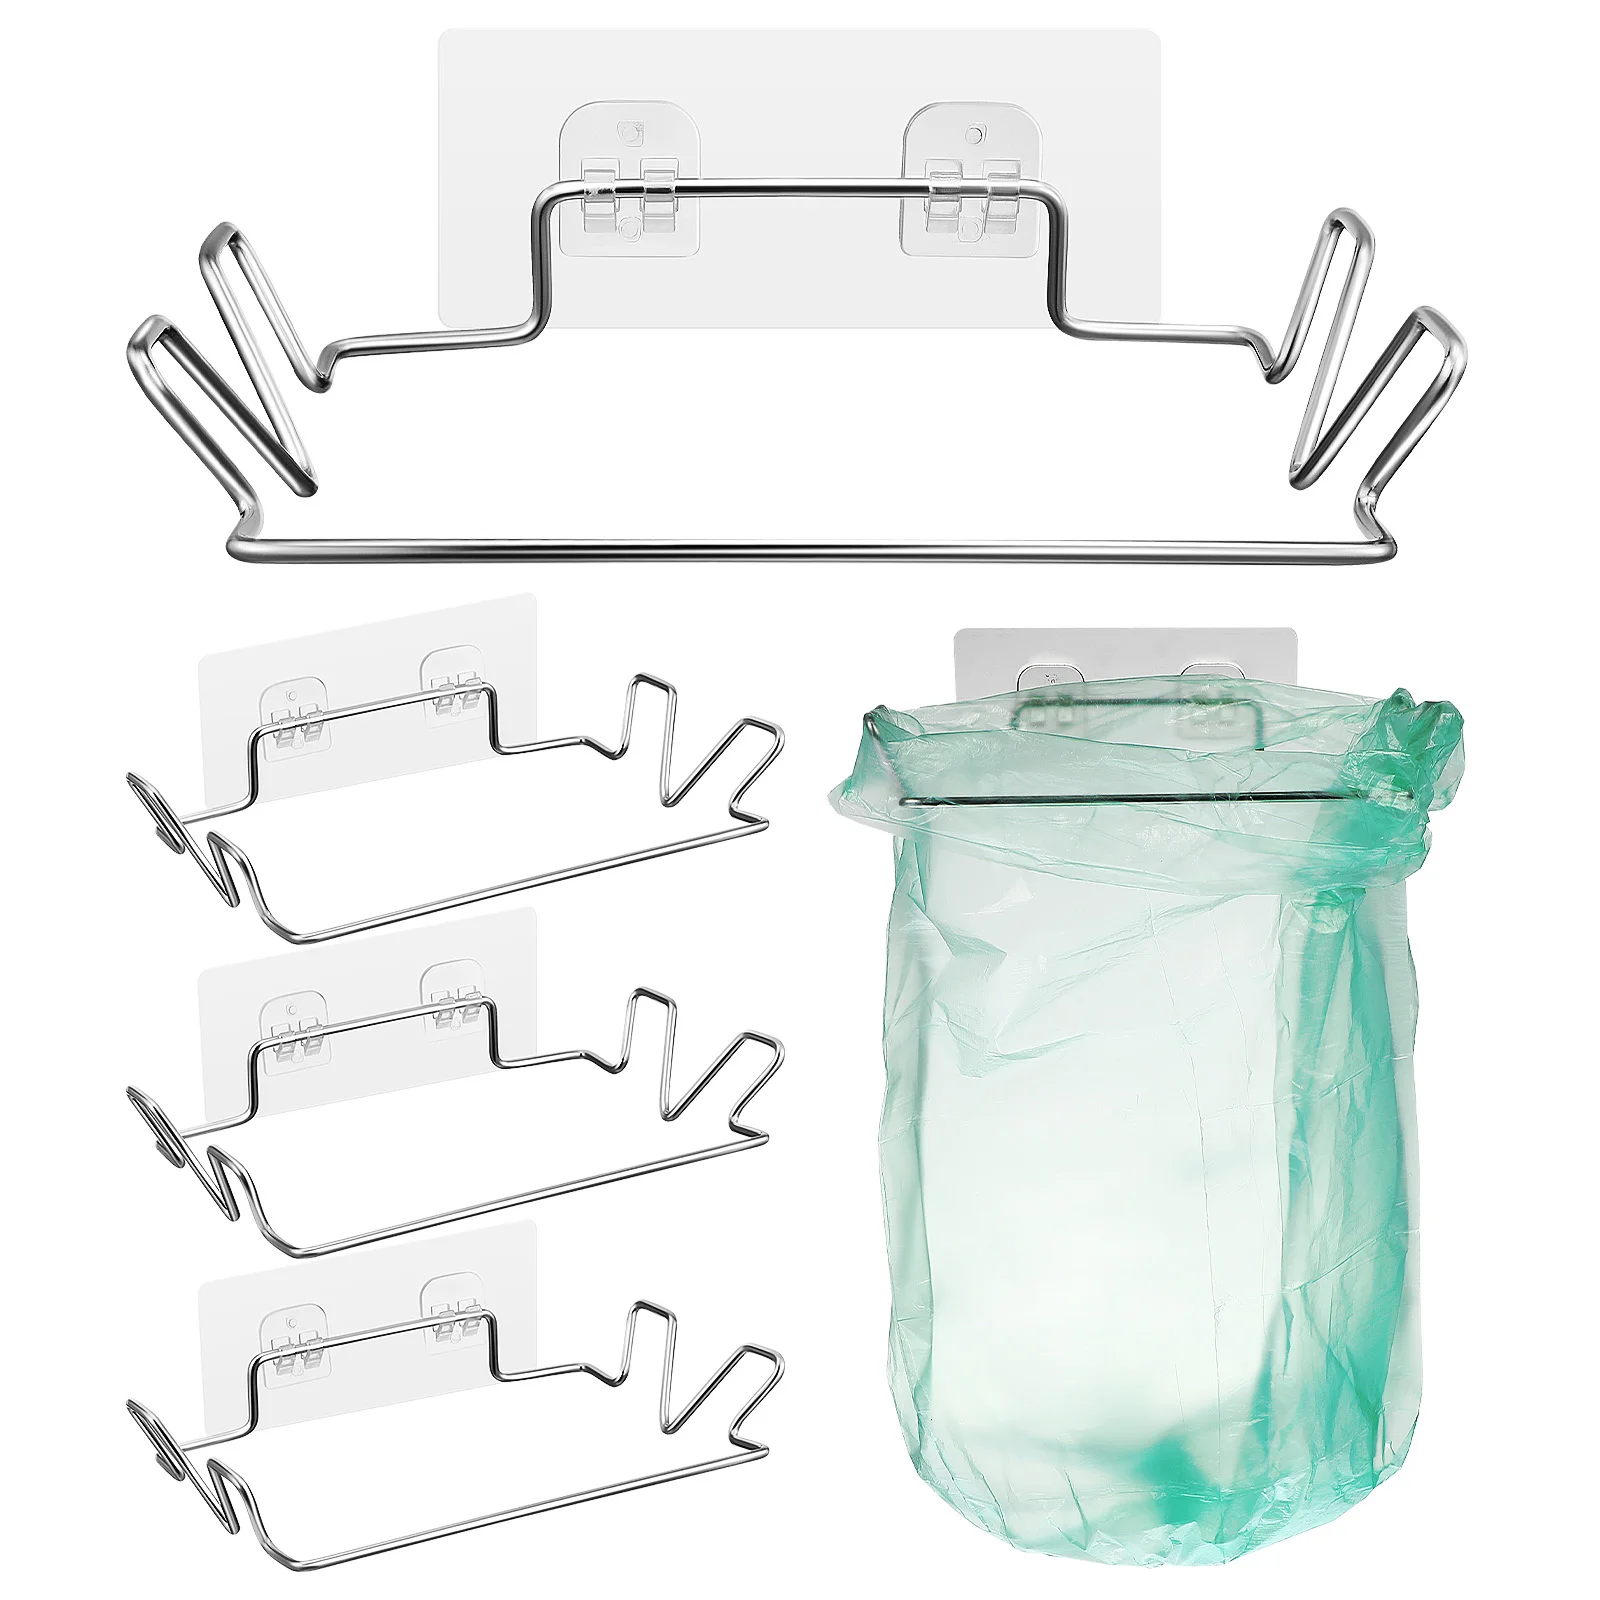 

4 Sets of Garbage Bags Holder Racks with Wall Stickers for Kitchen Cabinet Cupboard Drawer Back Door